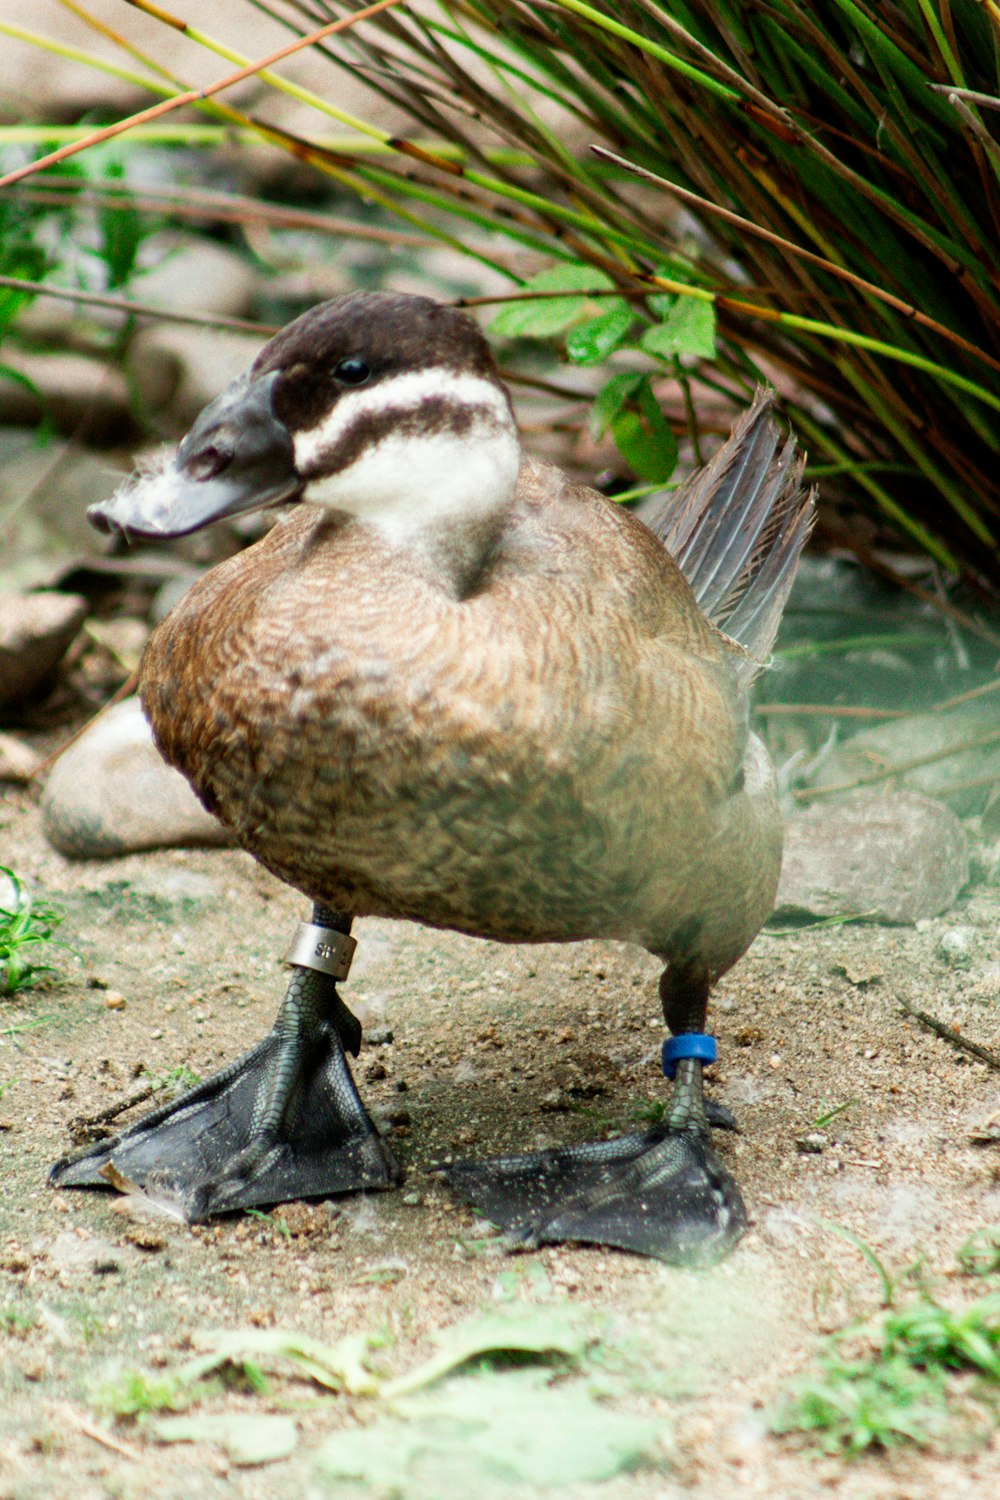 a duck standing on its hind legs on the ground